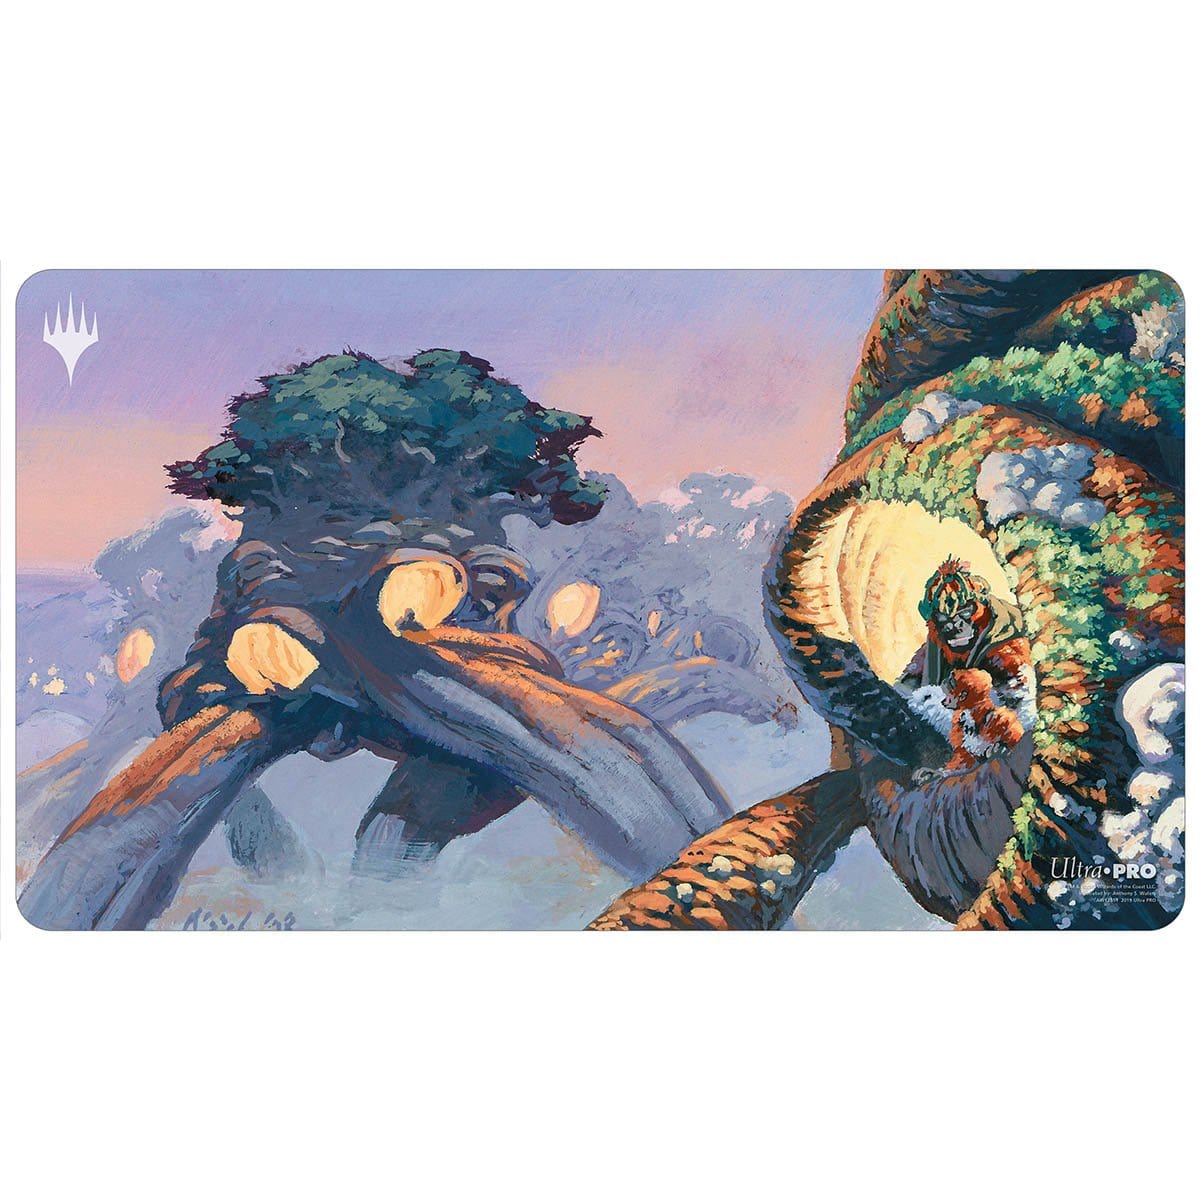 Treetop Village Playmat - Playmat - Original Magic Art - Accessories for Magic the Gathering and other card games